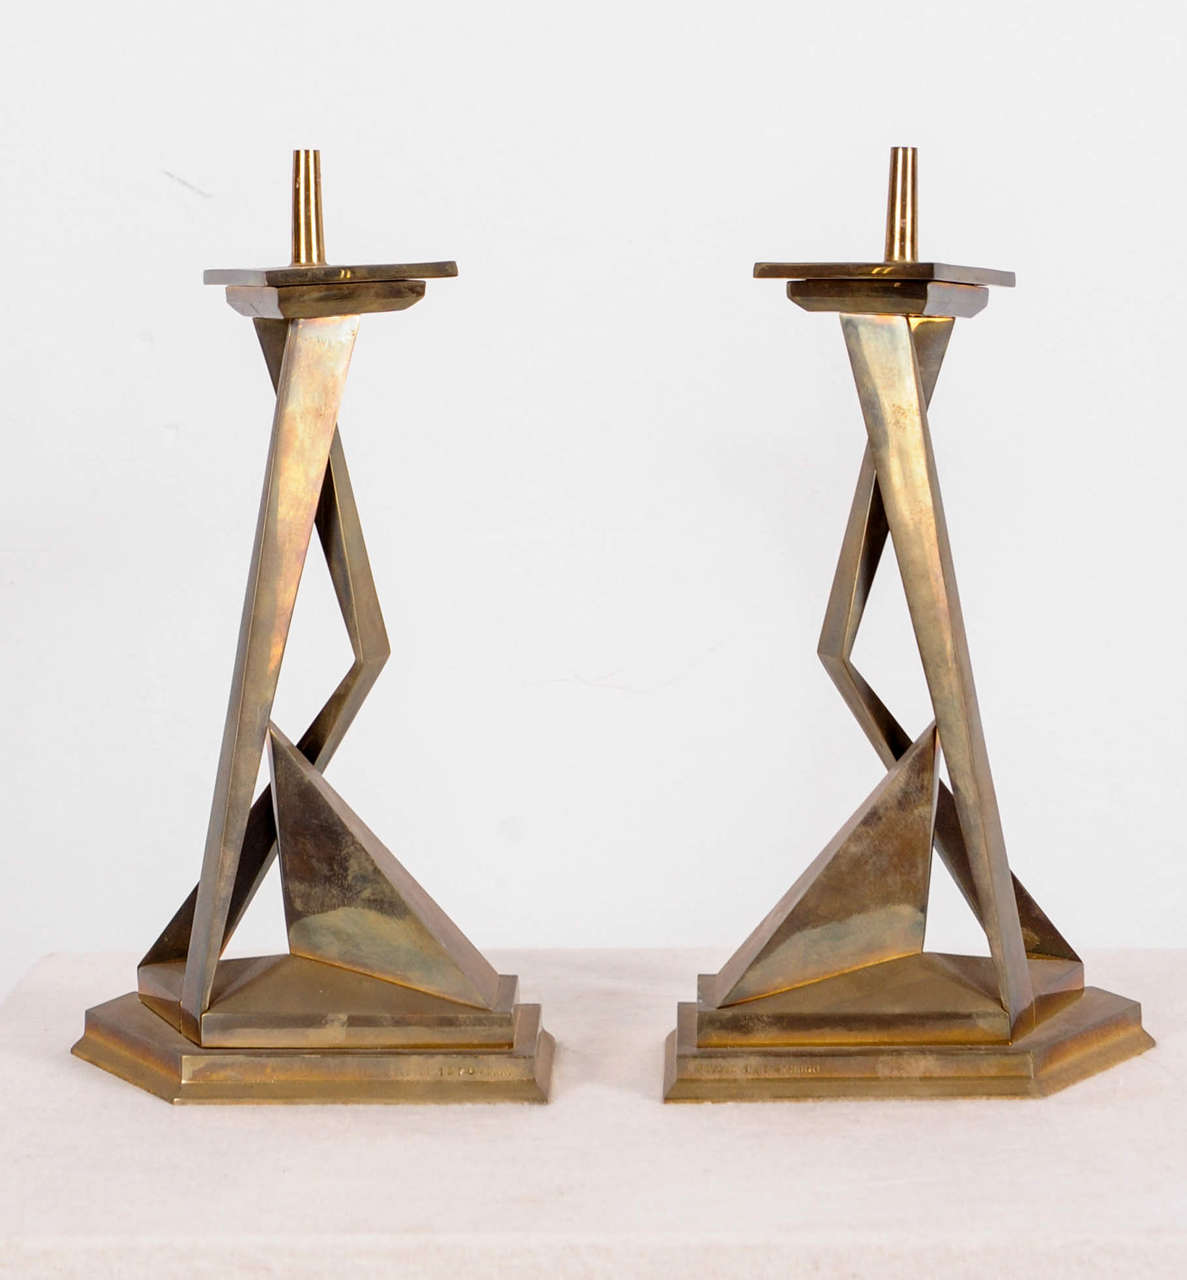 Two bronze candlesticks by Salvador Dali, representing the mythological twin brothers Castor and Pollux. Each candlestick has an interchangeable triangular shaped top insert. The object is signed Salvador Dali (on the edge of the plinth). Castor is